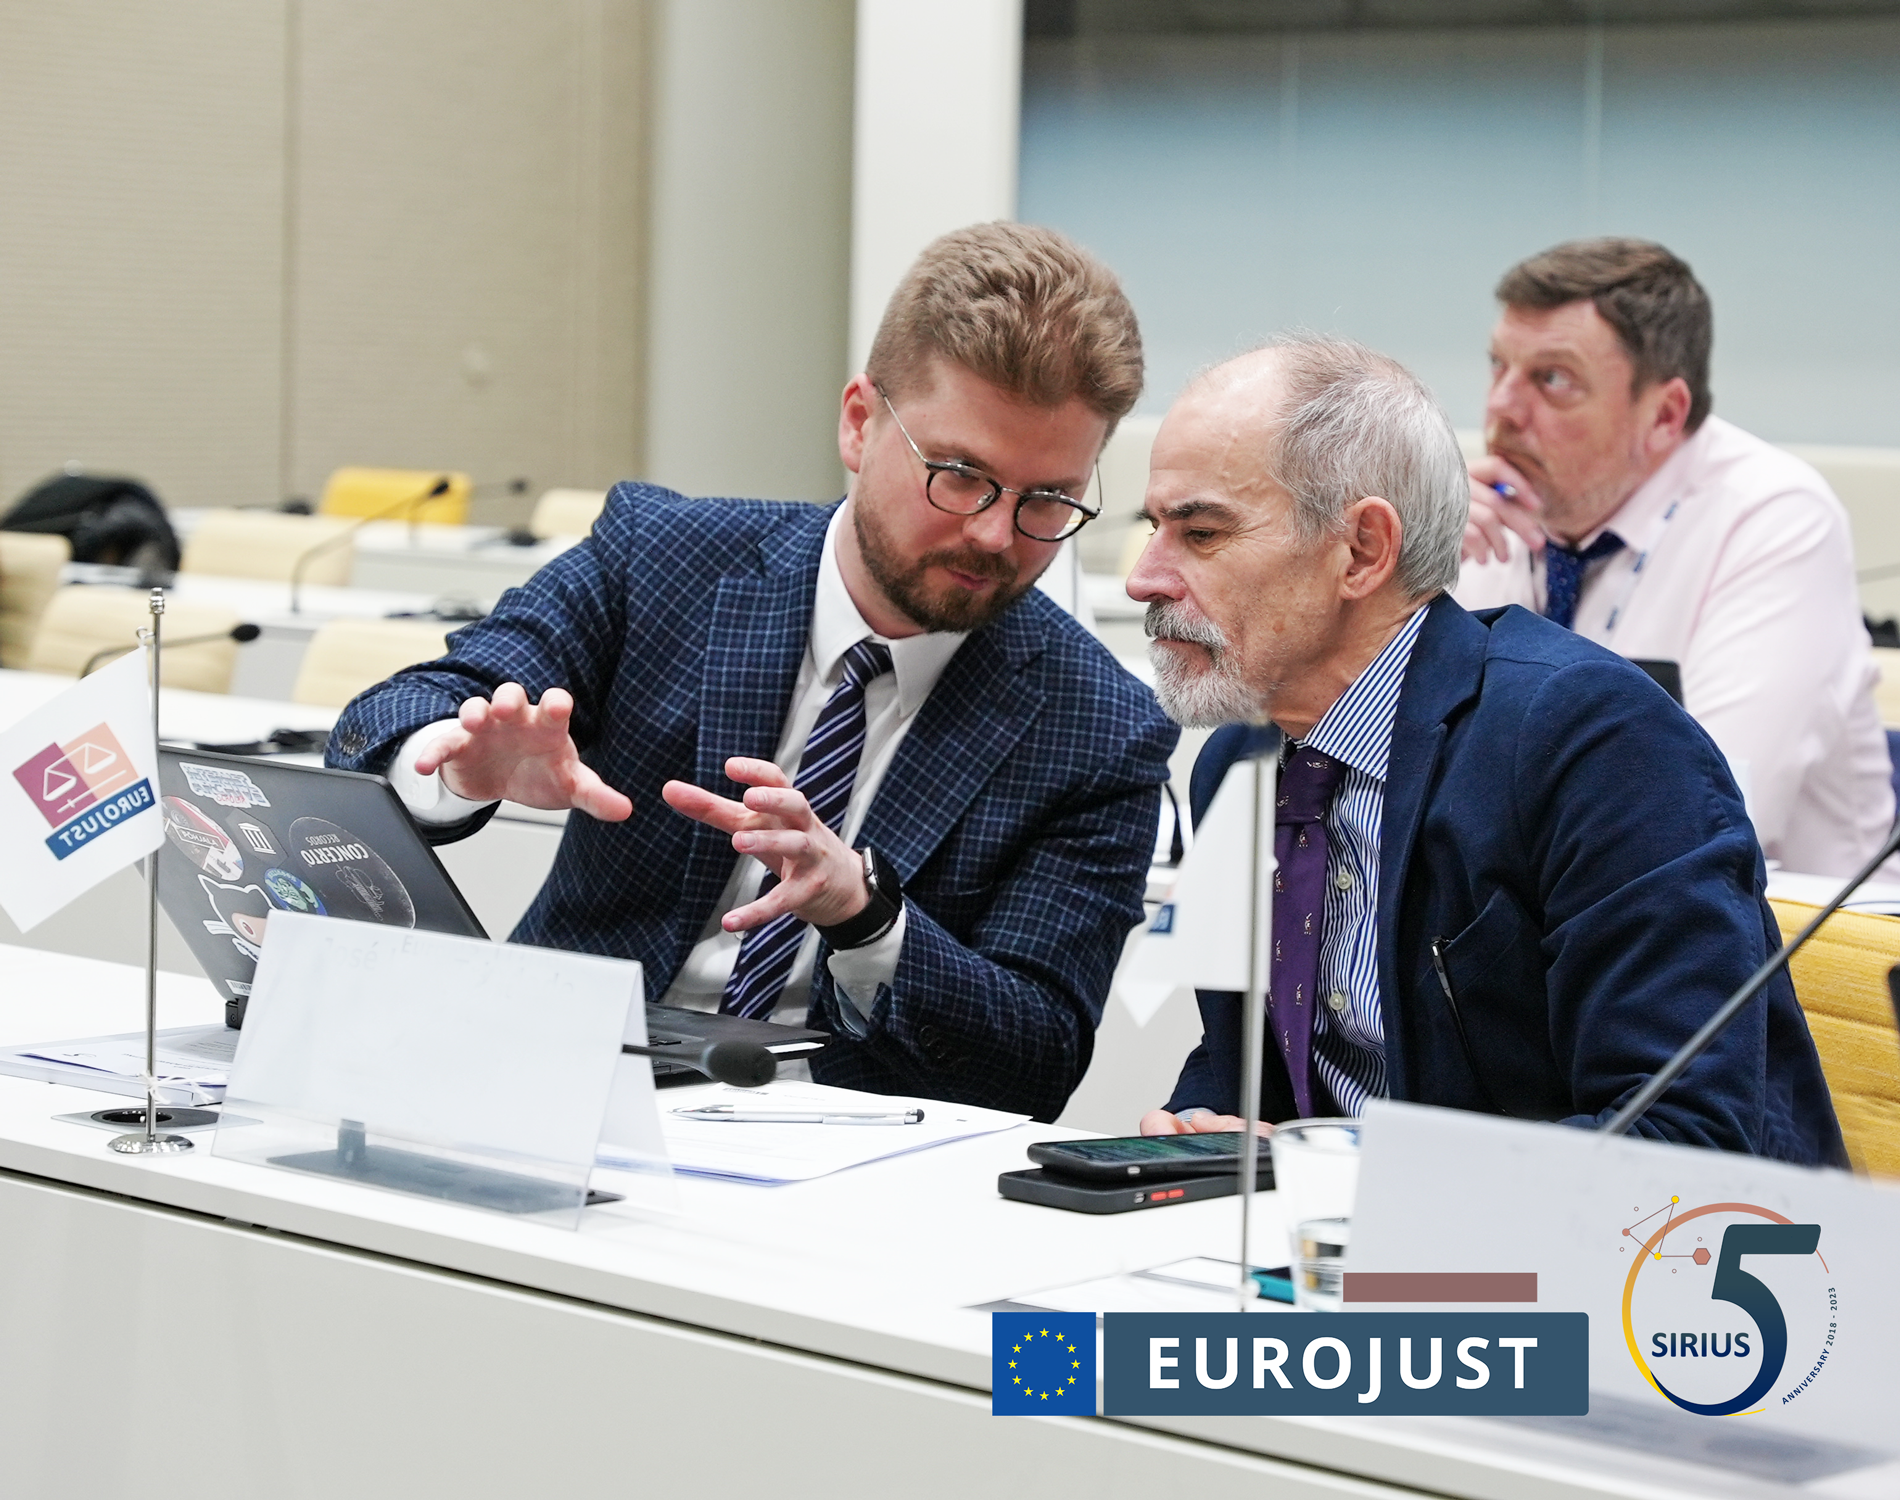 Participants of meeting having a discussion. Logo of Eurojust and SIRIUS added as overlay